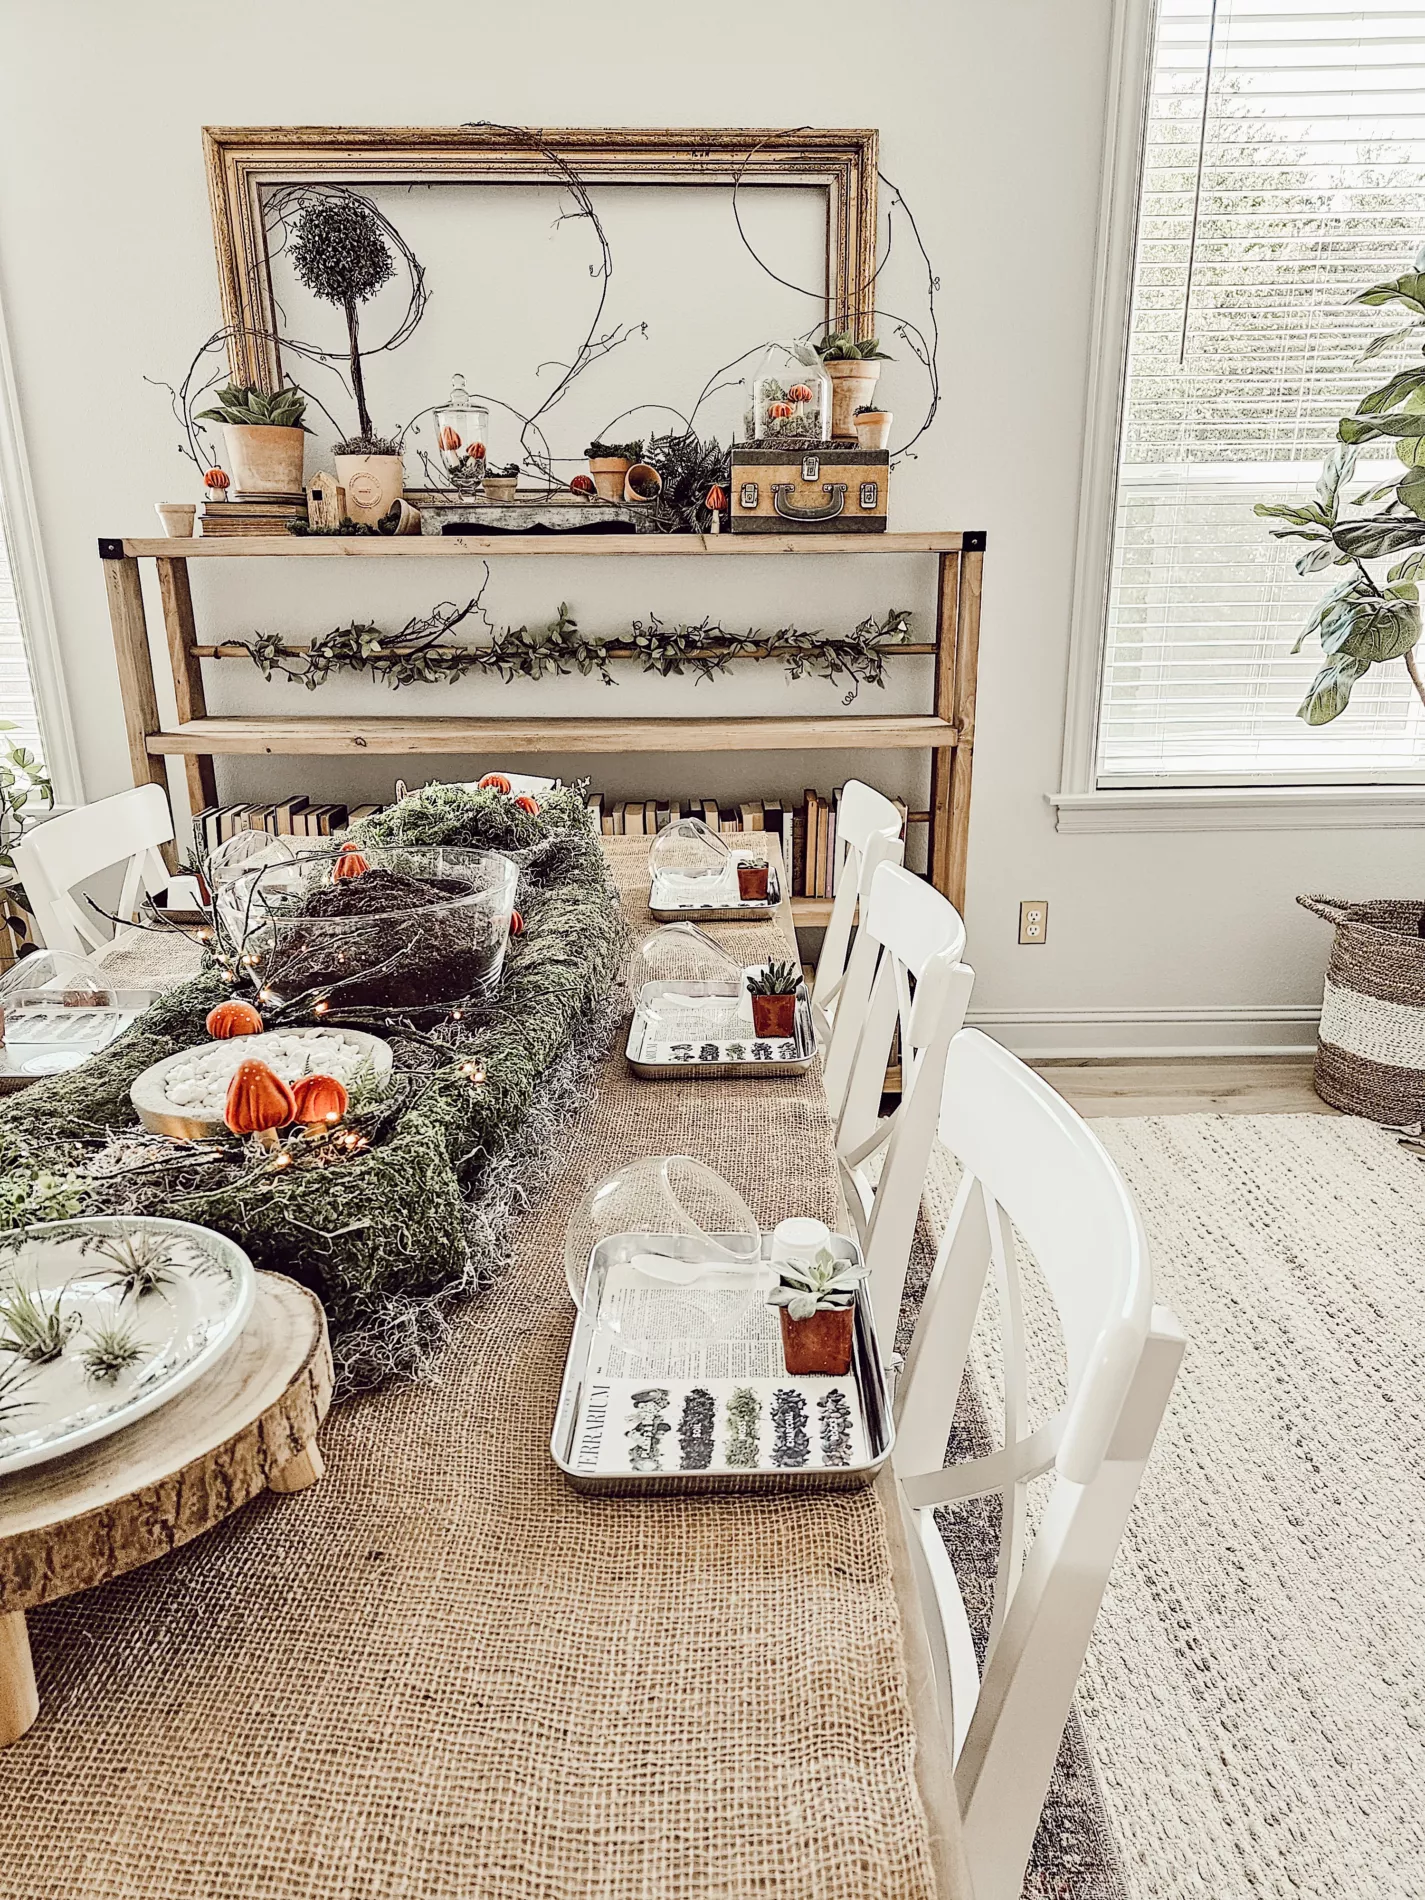 the DIY terrarium party space with the place settings ready